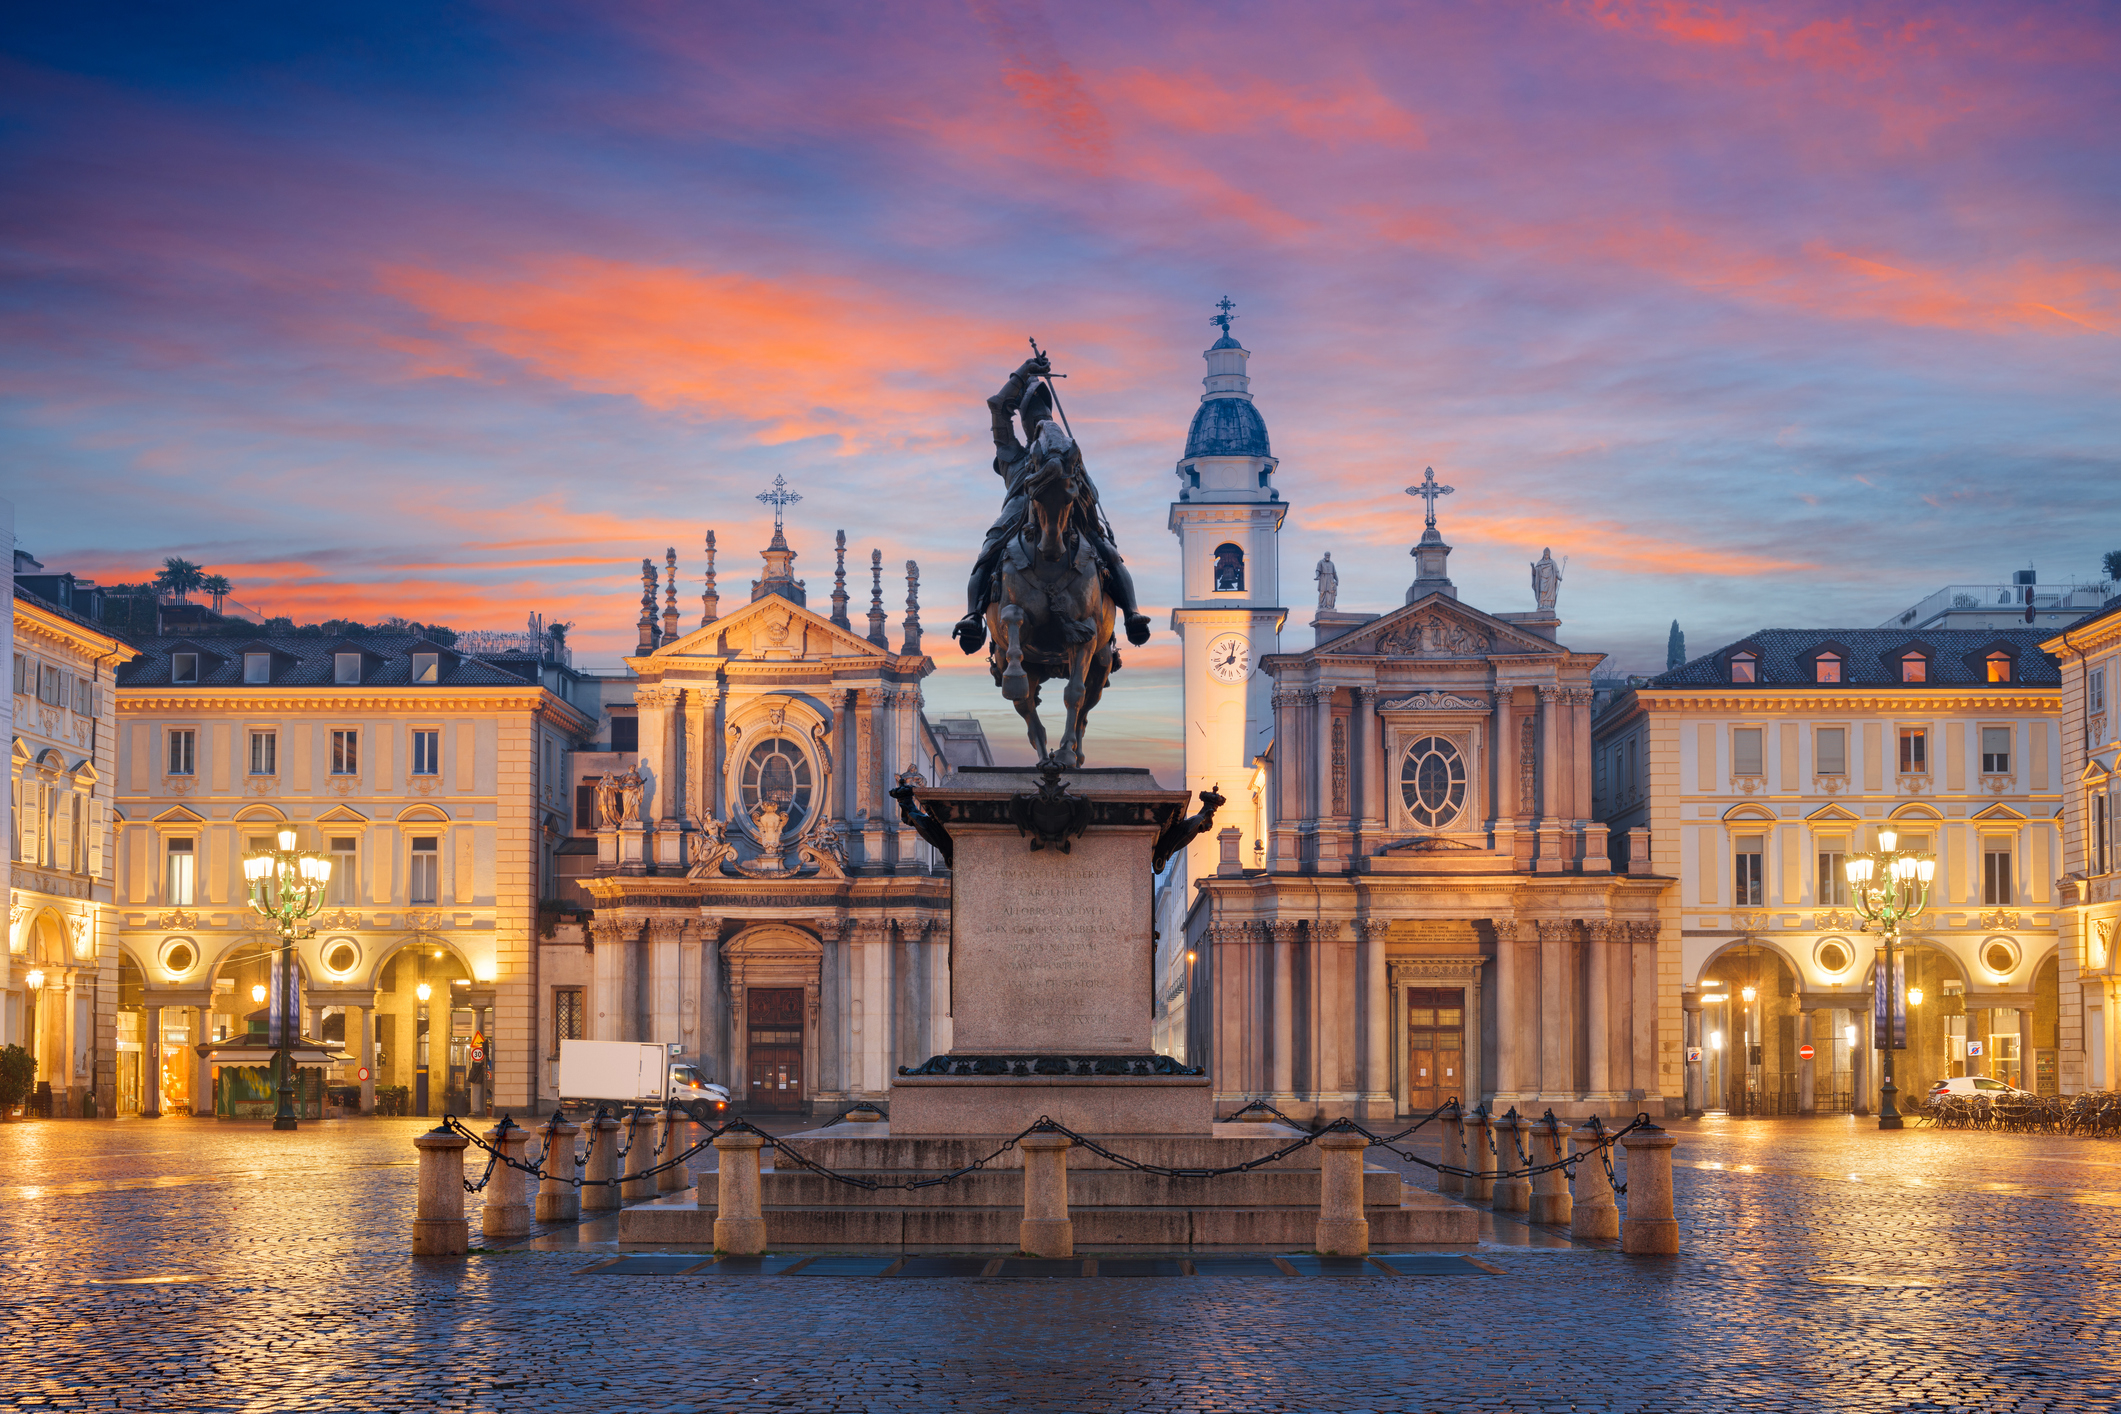 Historical square with a statue and two churches under a sunset sky